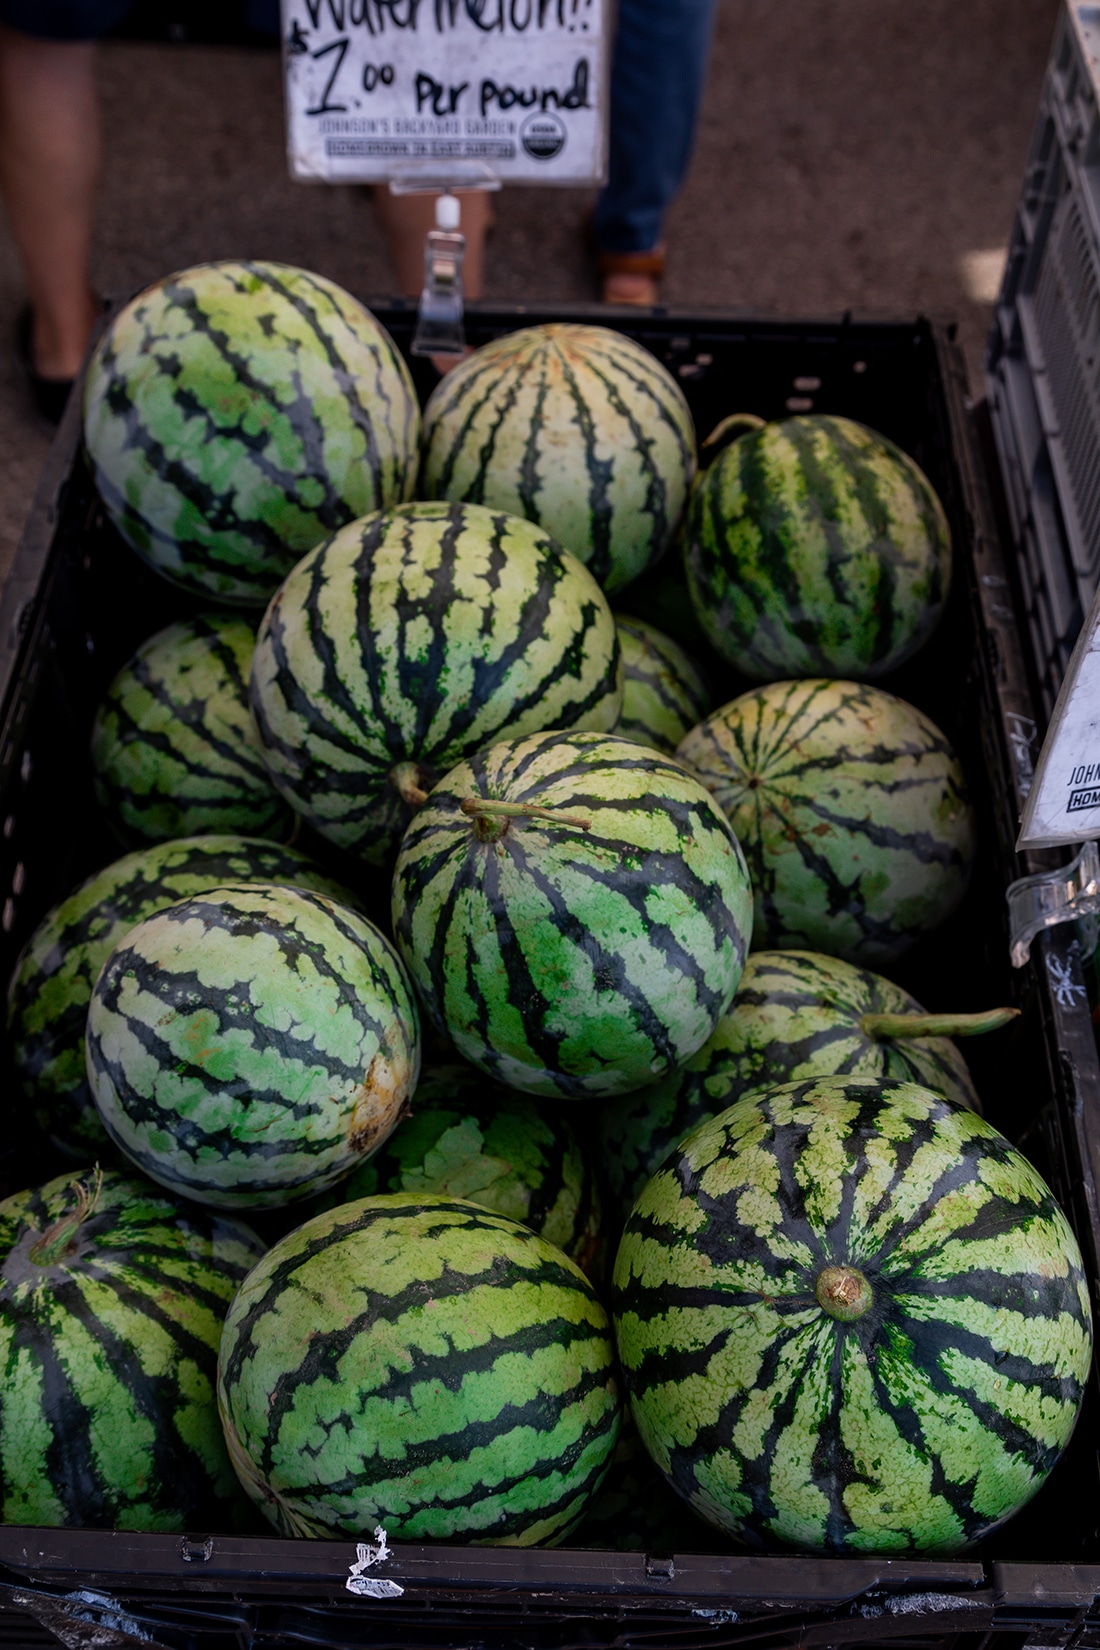 About 20 round melons stacked at a farmers market.